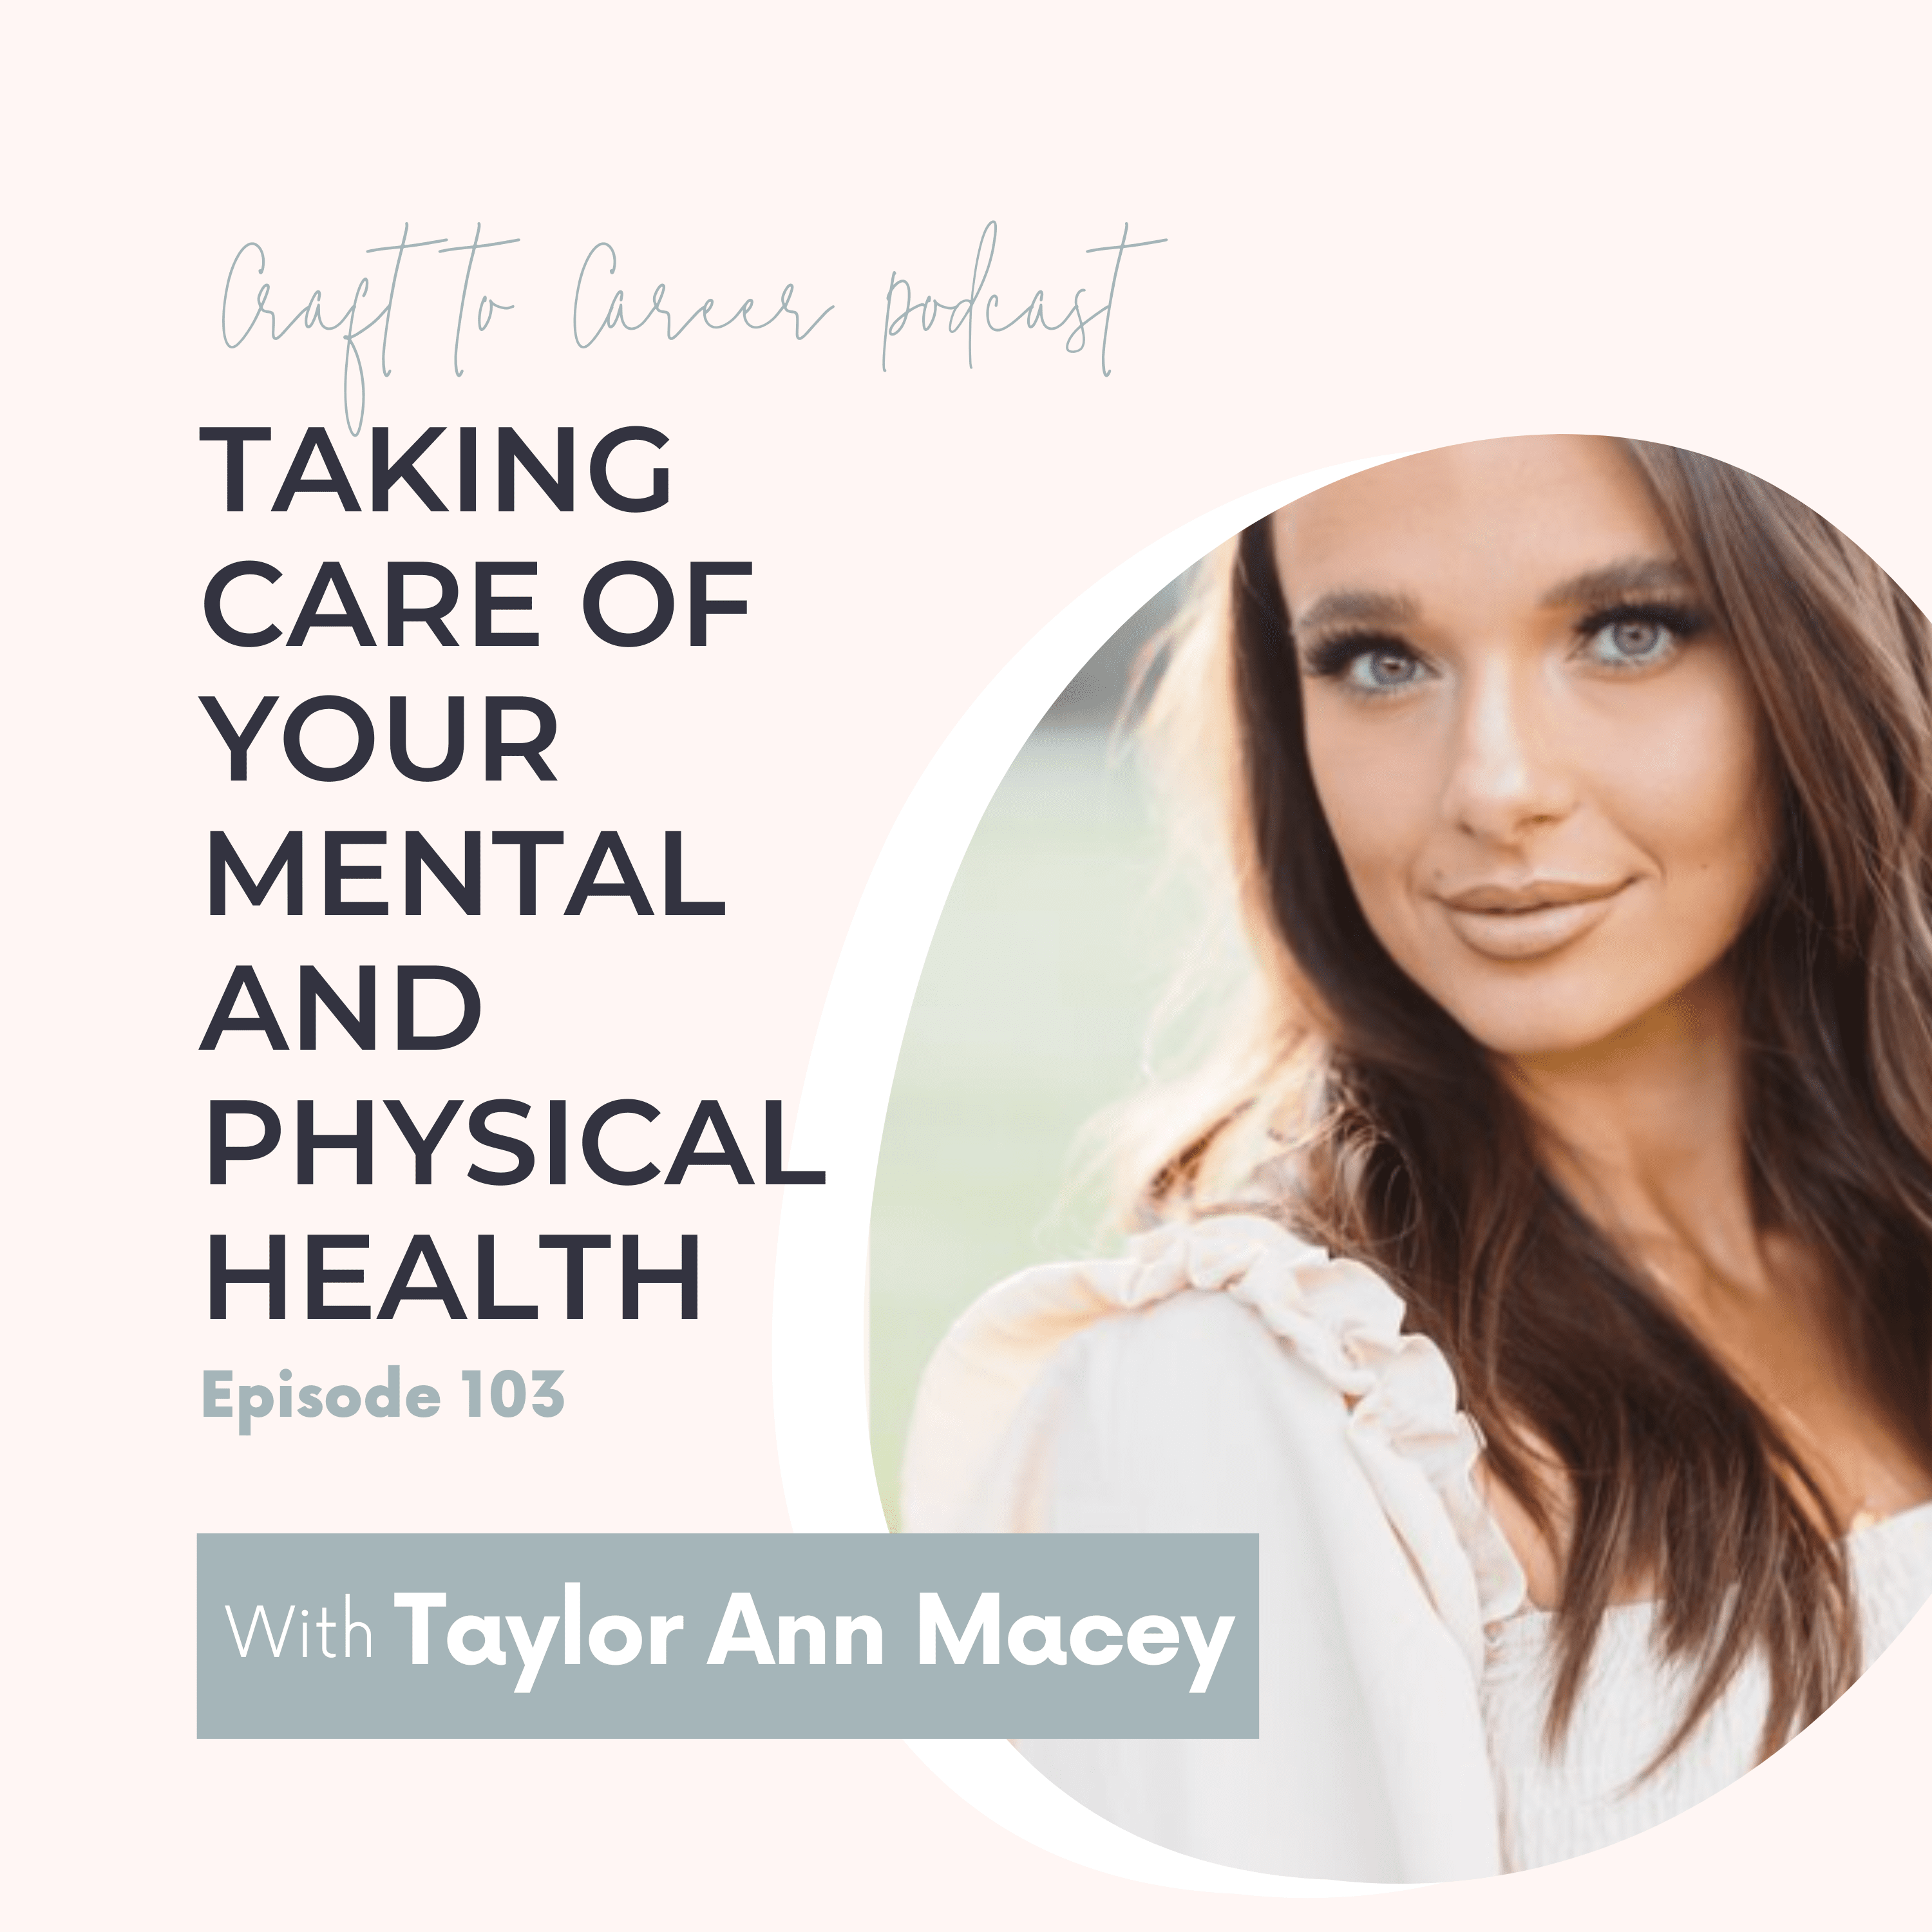 Taking Care of your Mental and Physical Health with Taylor Ann Macey